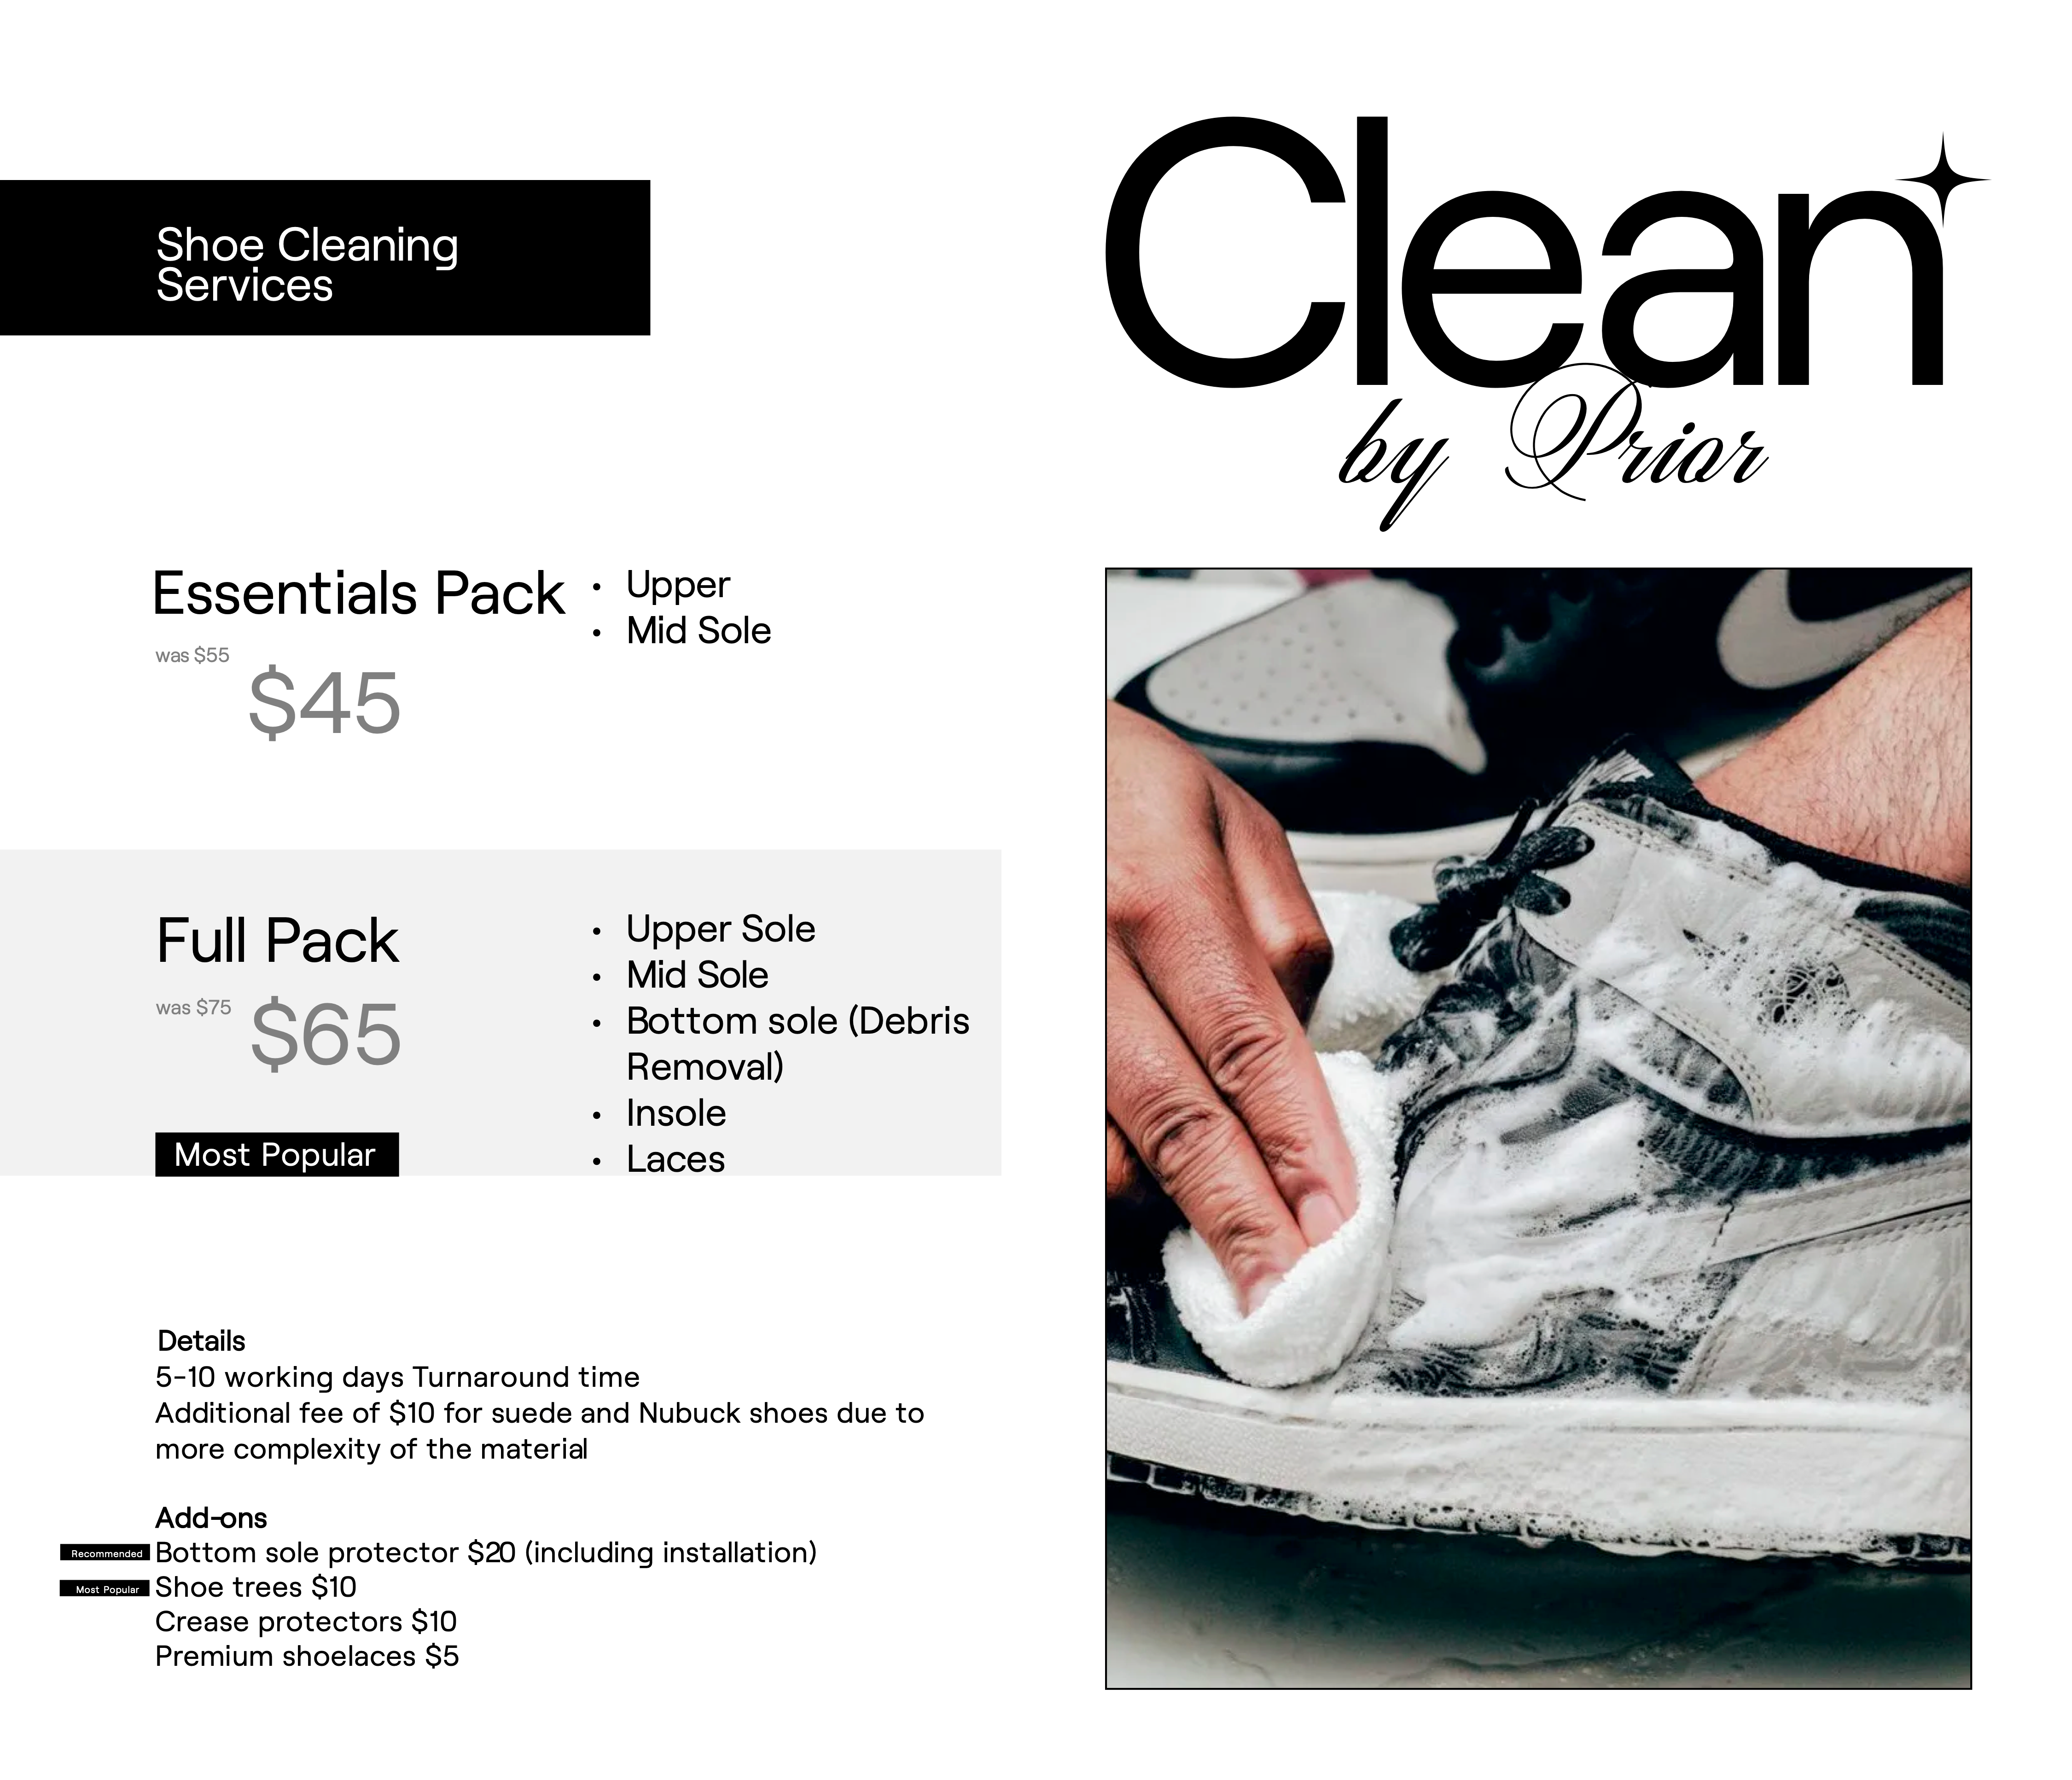 Shoe cleaning service in Auckland, New Zealand